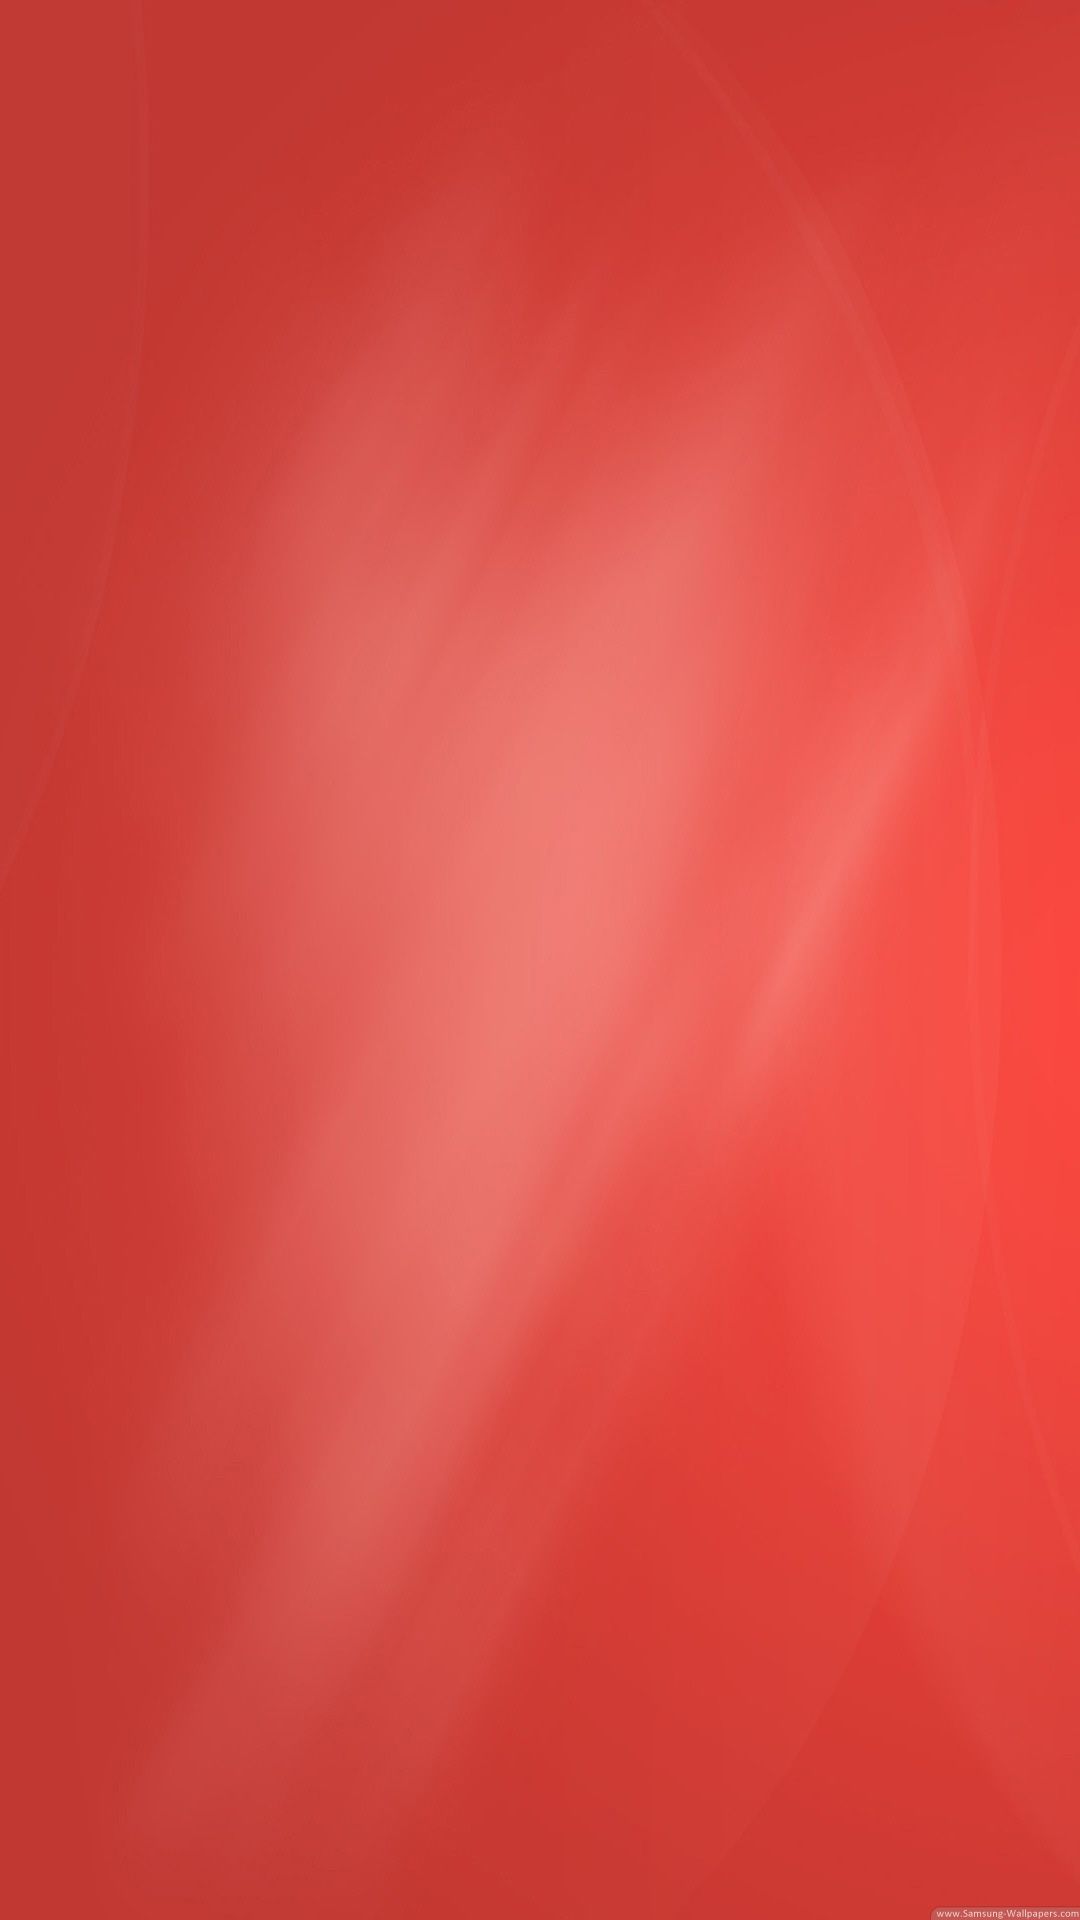 Simple Red Angled Gradient iPhone 6 Plus HD Wallpaper HD